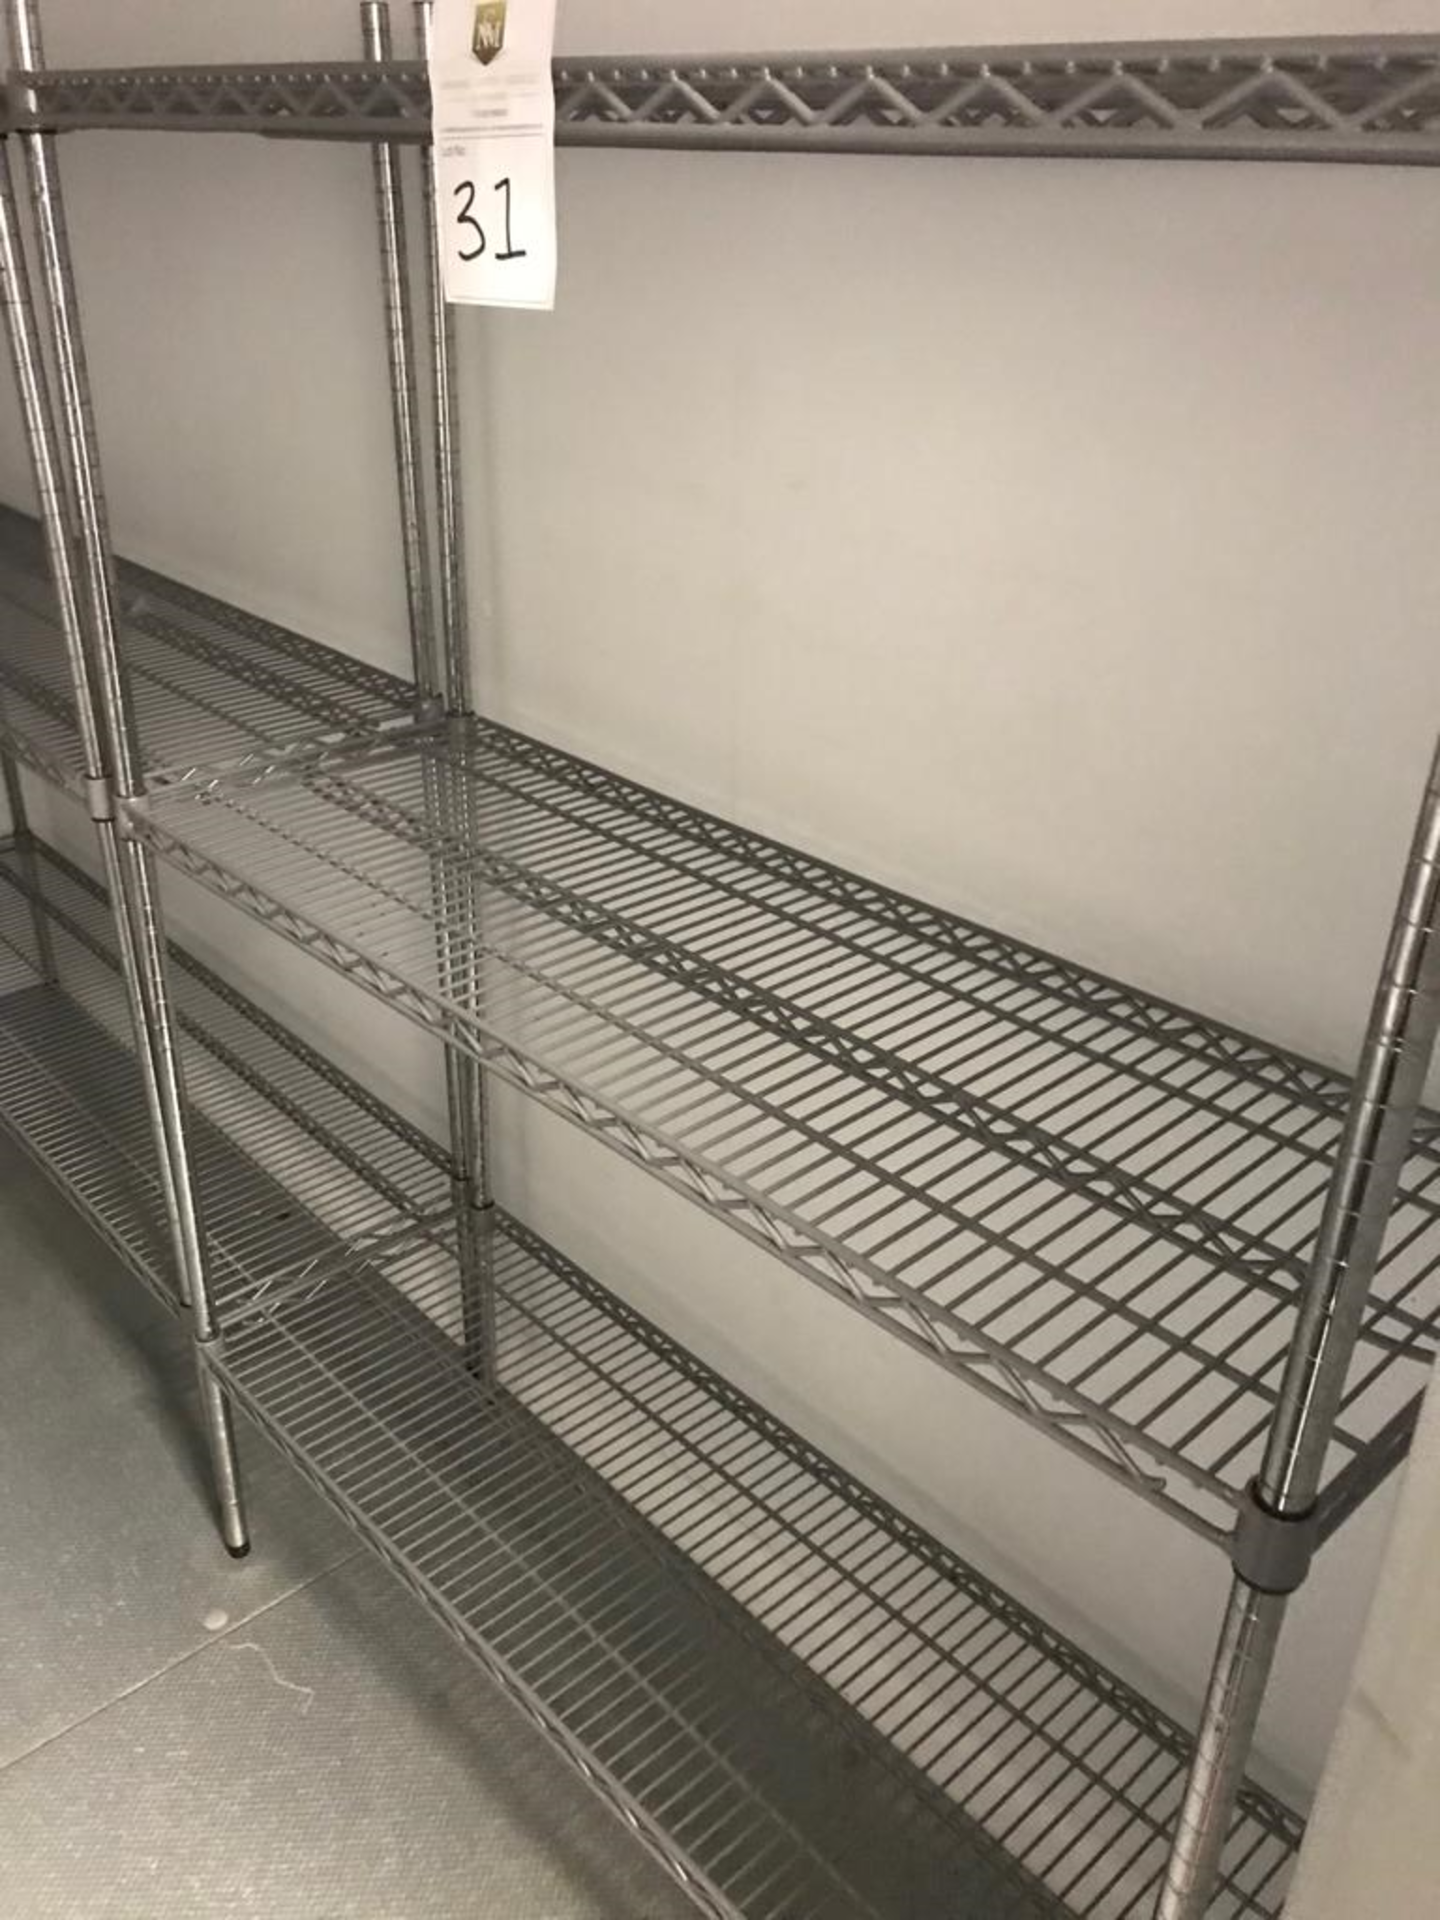 5 Piece Stainless Steel Racking - Image 11 of 12